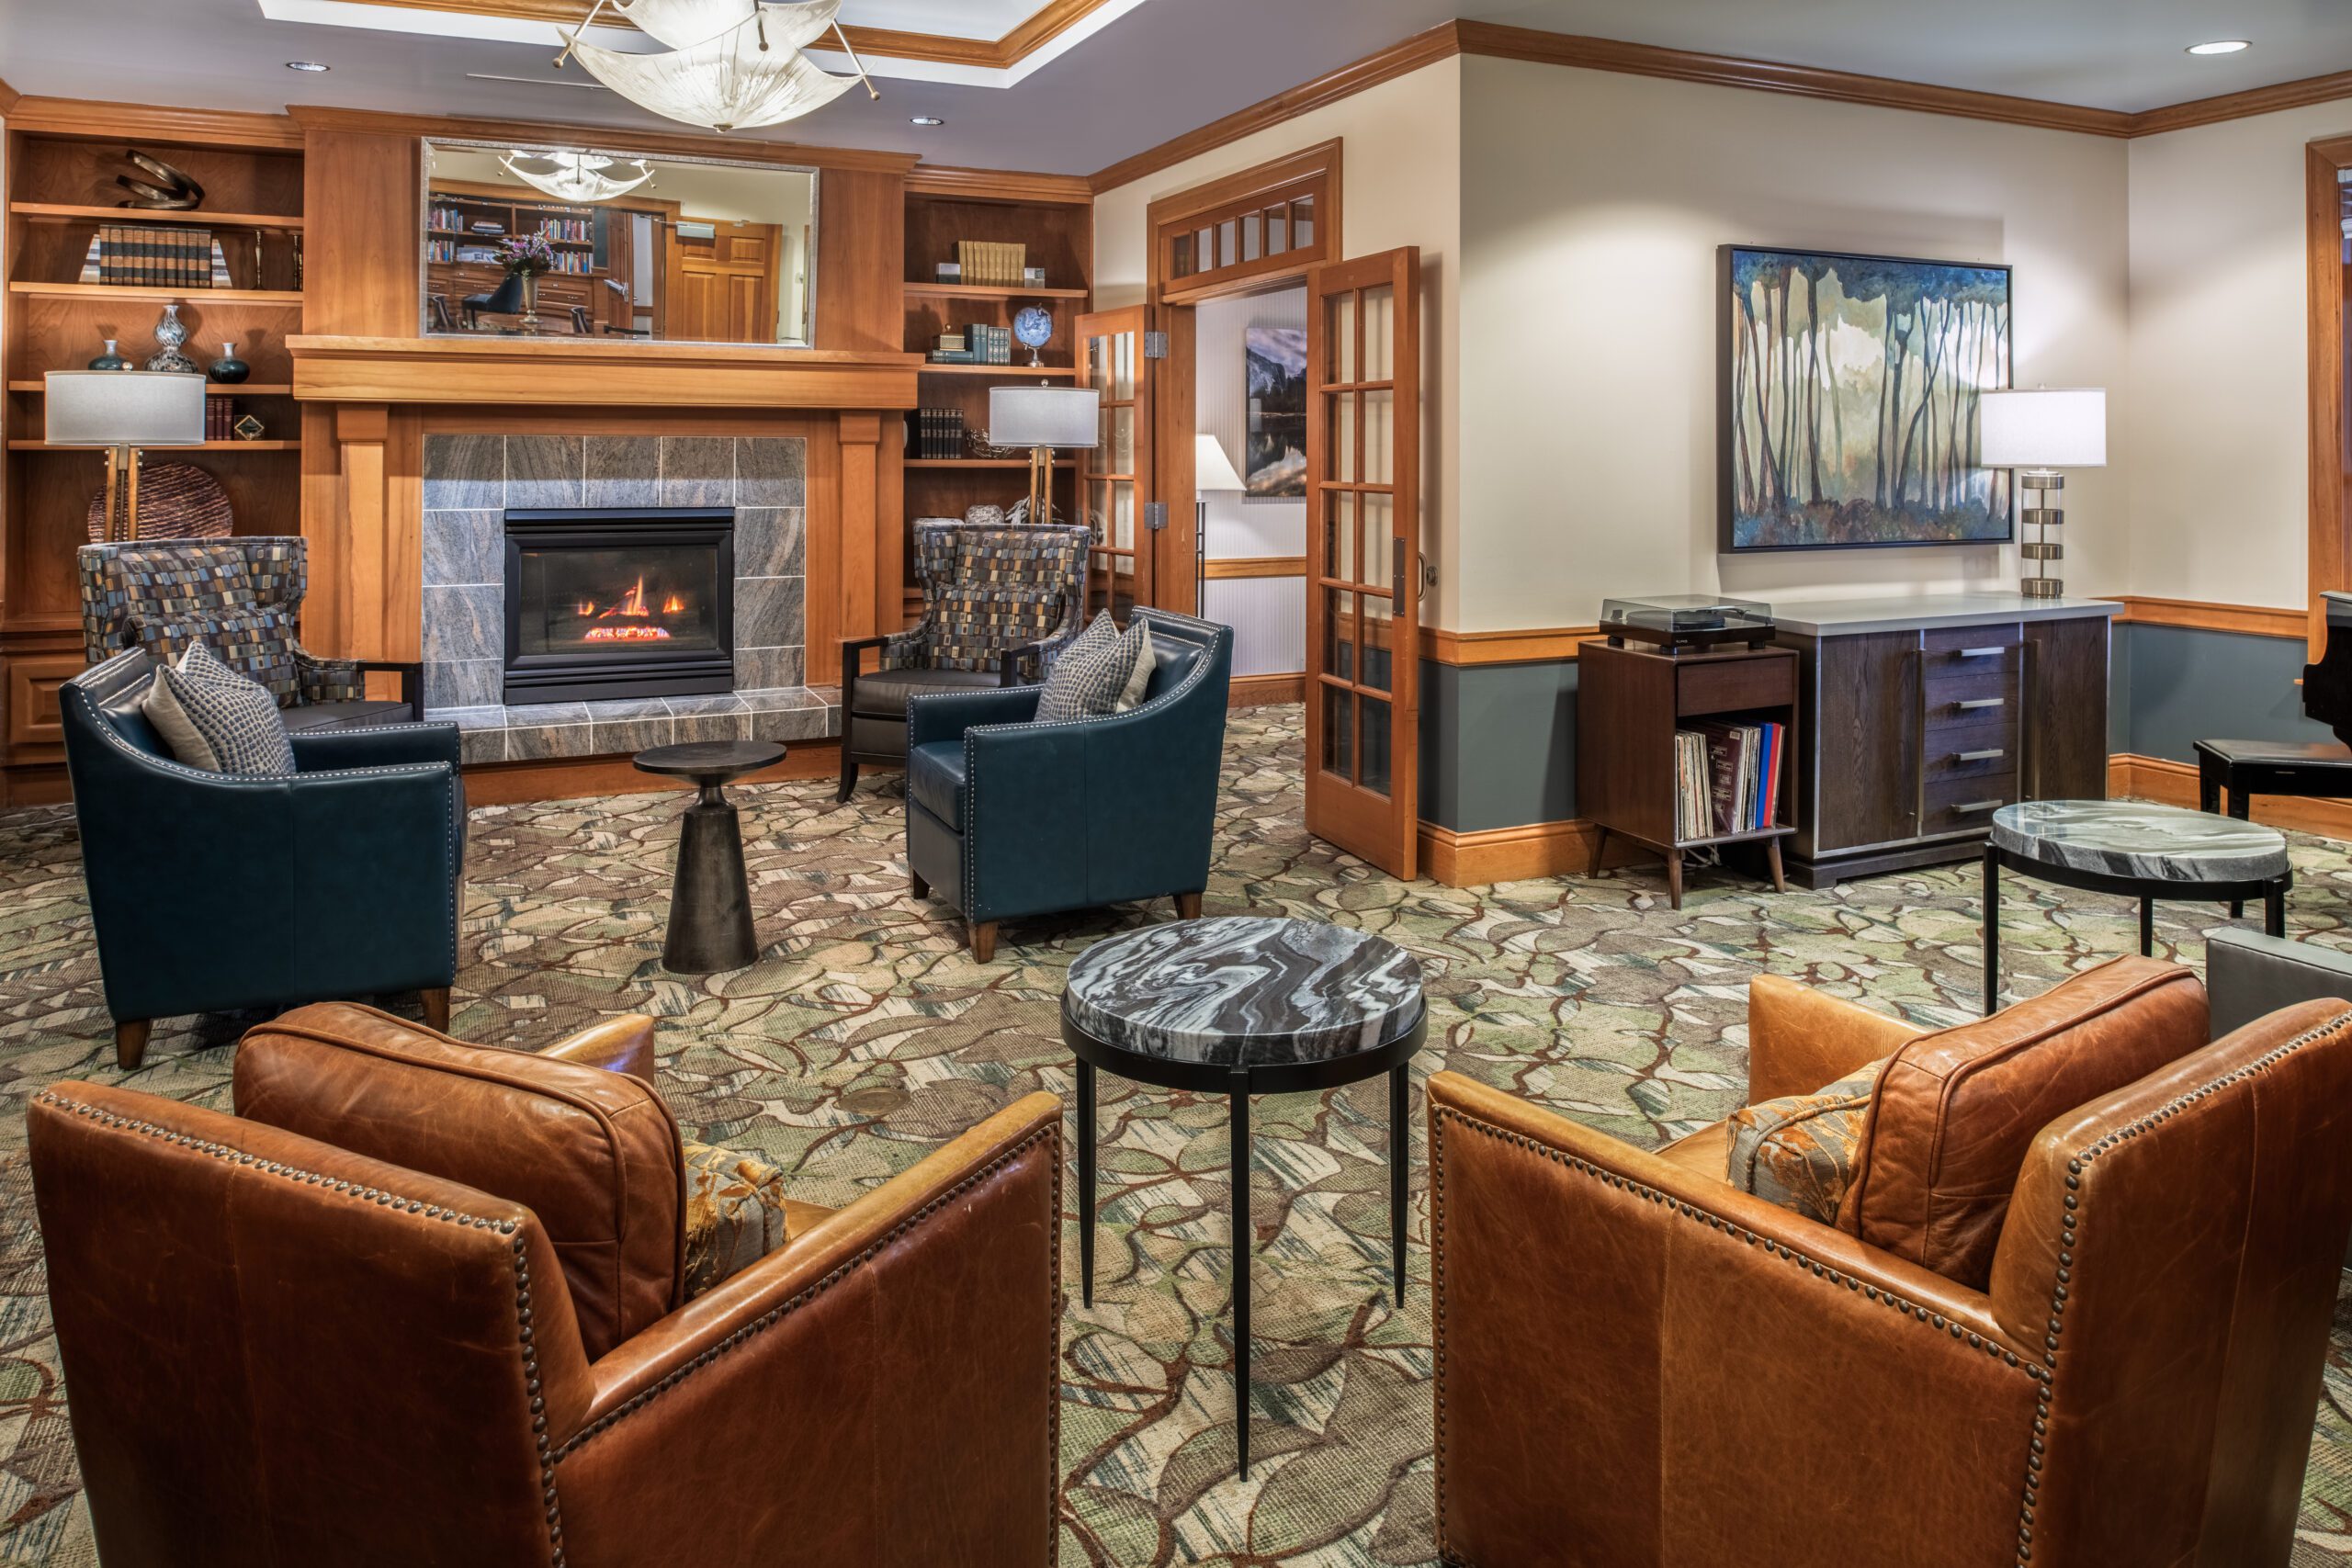 Living room at northwest place: cozy space with comfortable furniture, fireplace, and stunning mountain views.